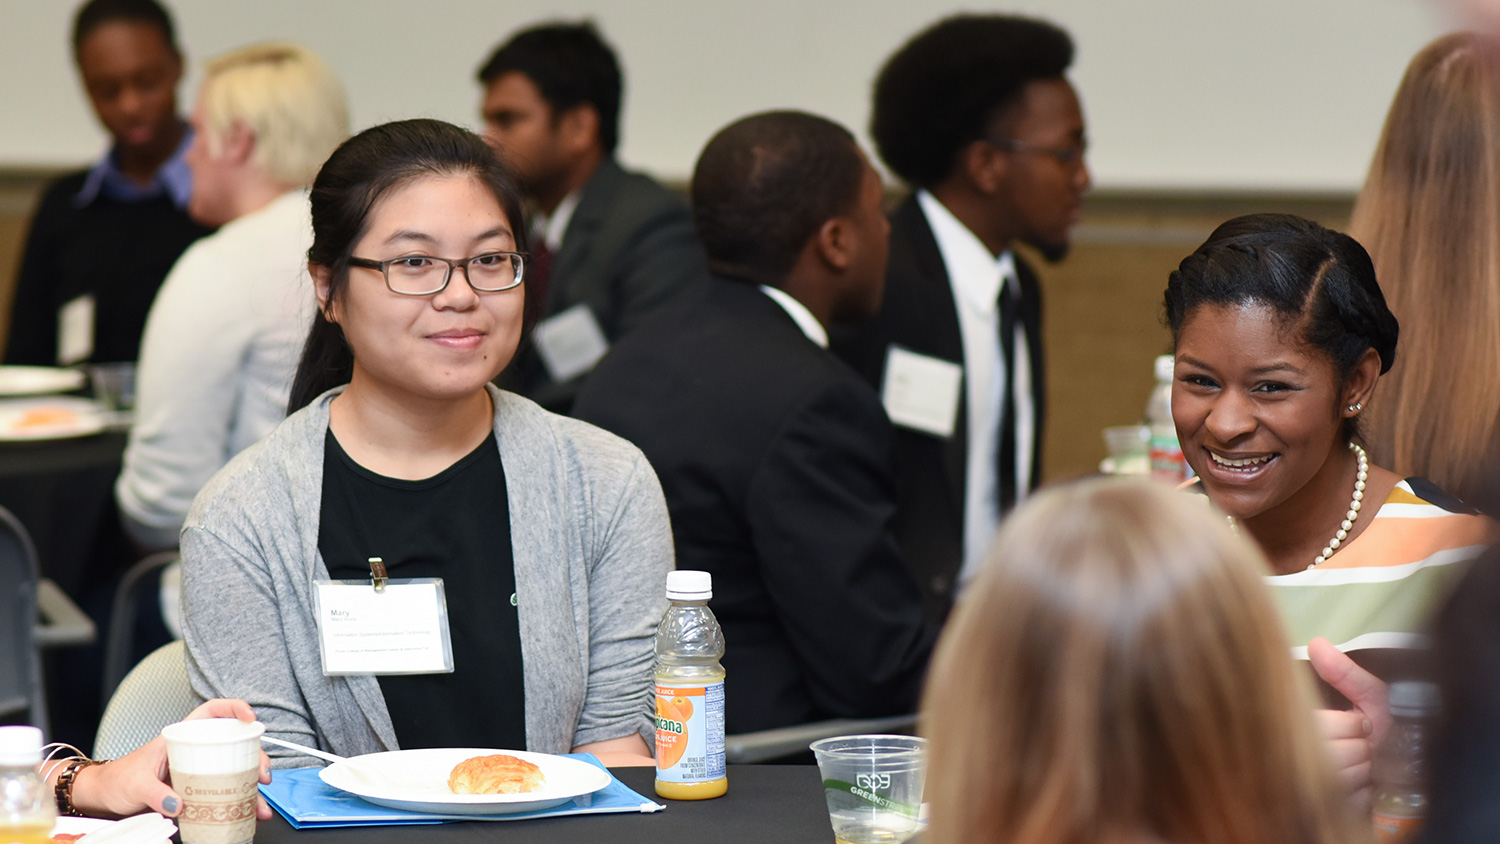 Students and recruiters discuss diversity and inclusion in the workplace at this breakfast meeting.